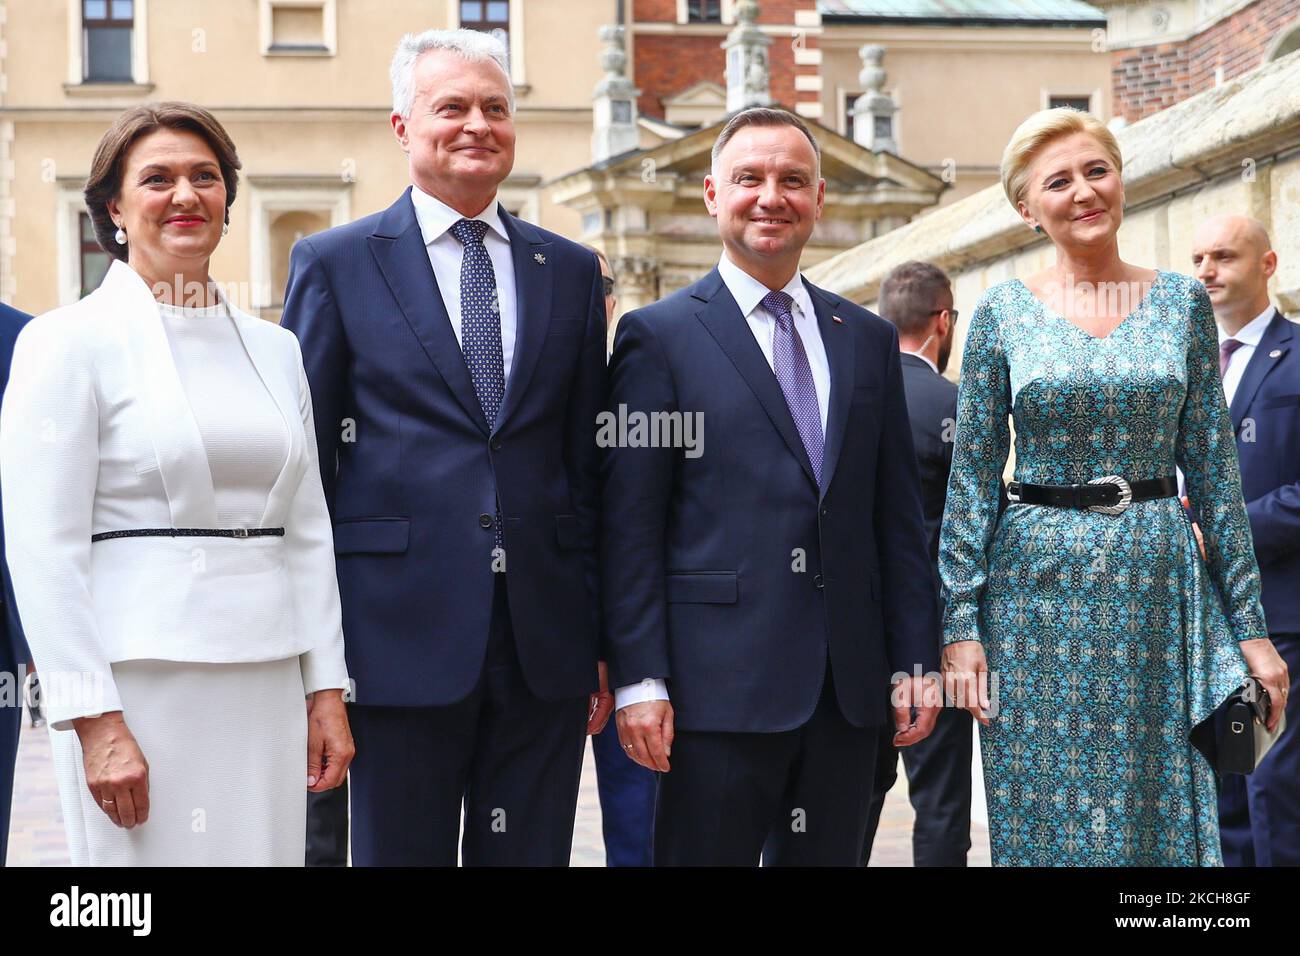 Lithuanian President Gitanas Nauseda and First Lady Diana Nausediene are welcomed by Poland’s presidential couple Andrzej Duda and Agata Korhauser-Duda by the Wawel Cathedral in Krakow, Poland on July 11, 2021. Presidents met to discuss Poland’s help in protecting Lithuania’s borders from the recent influx of illegal immigrants from Belarus. (Photo by Beata Zawrzel/NurPhoto) Stock Photo